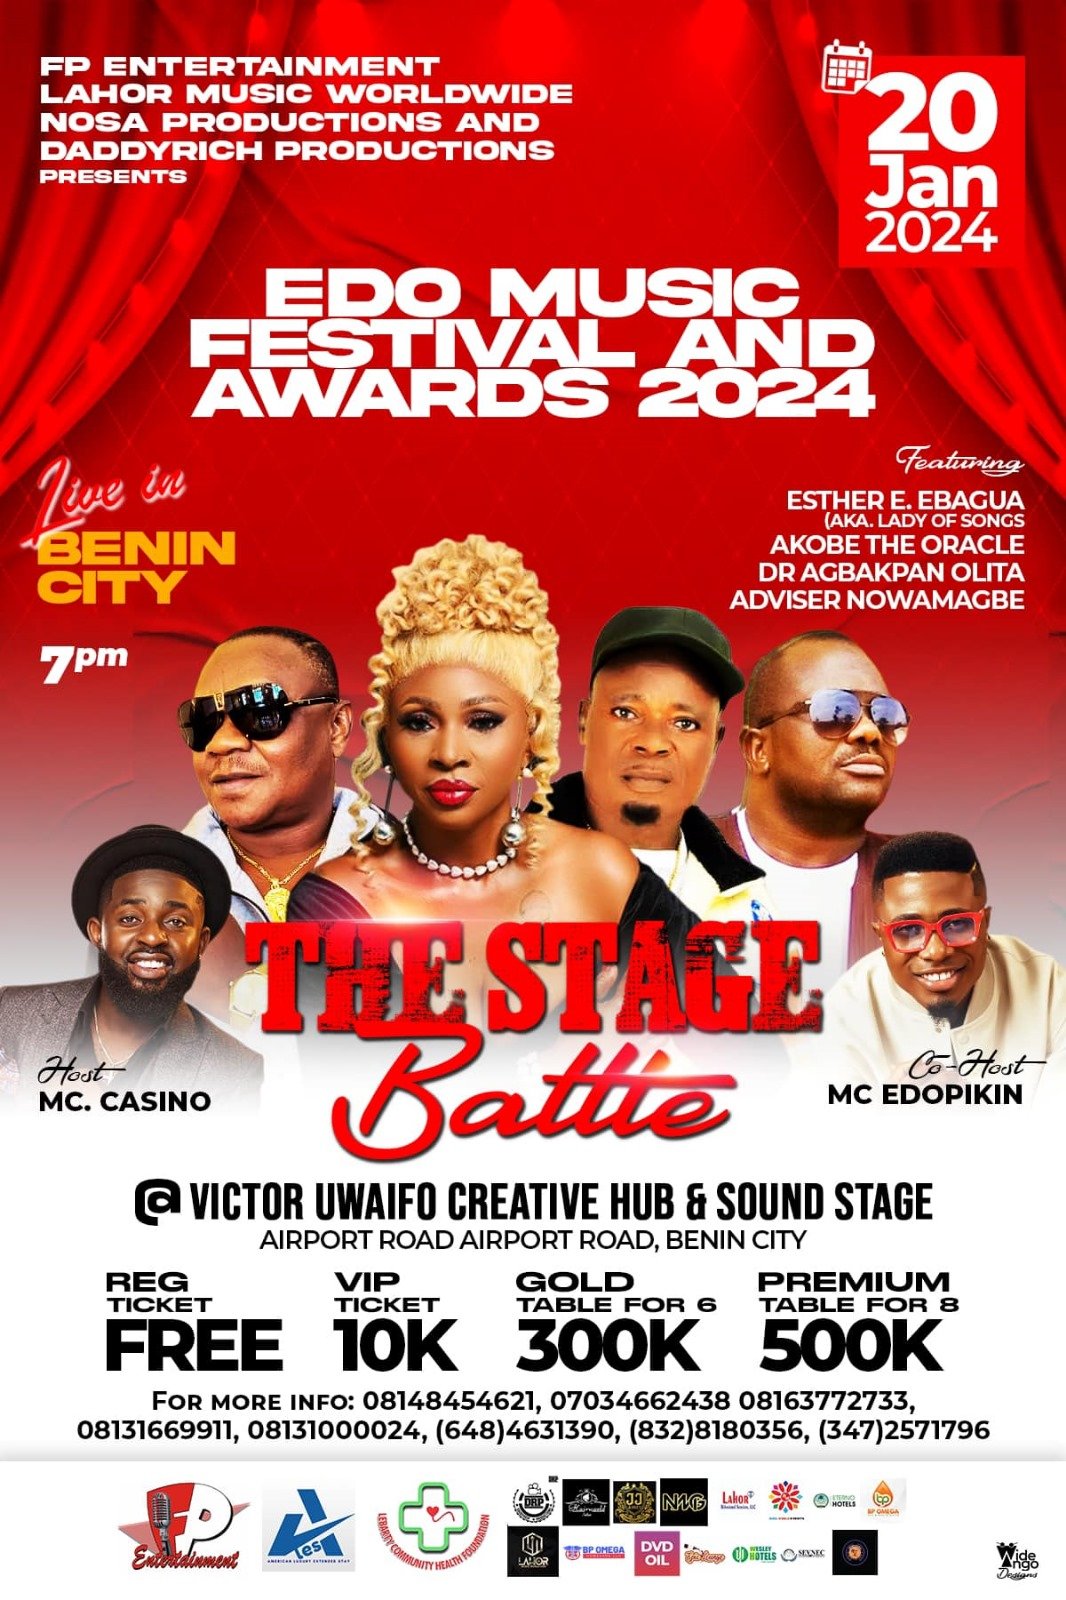 "Edo Music Festival and Awards 2024: A Night of Musical Extravaganza in Benin City!"